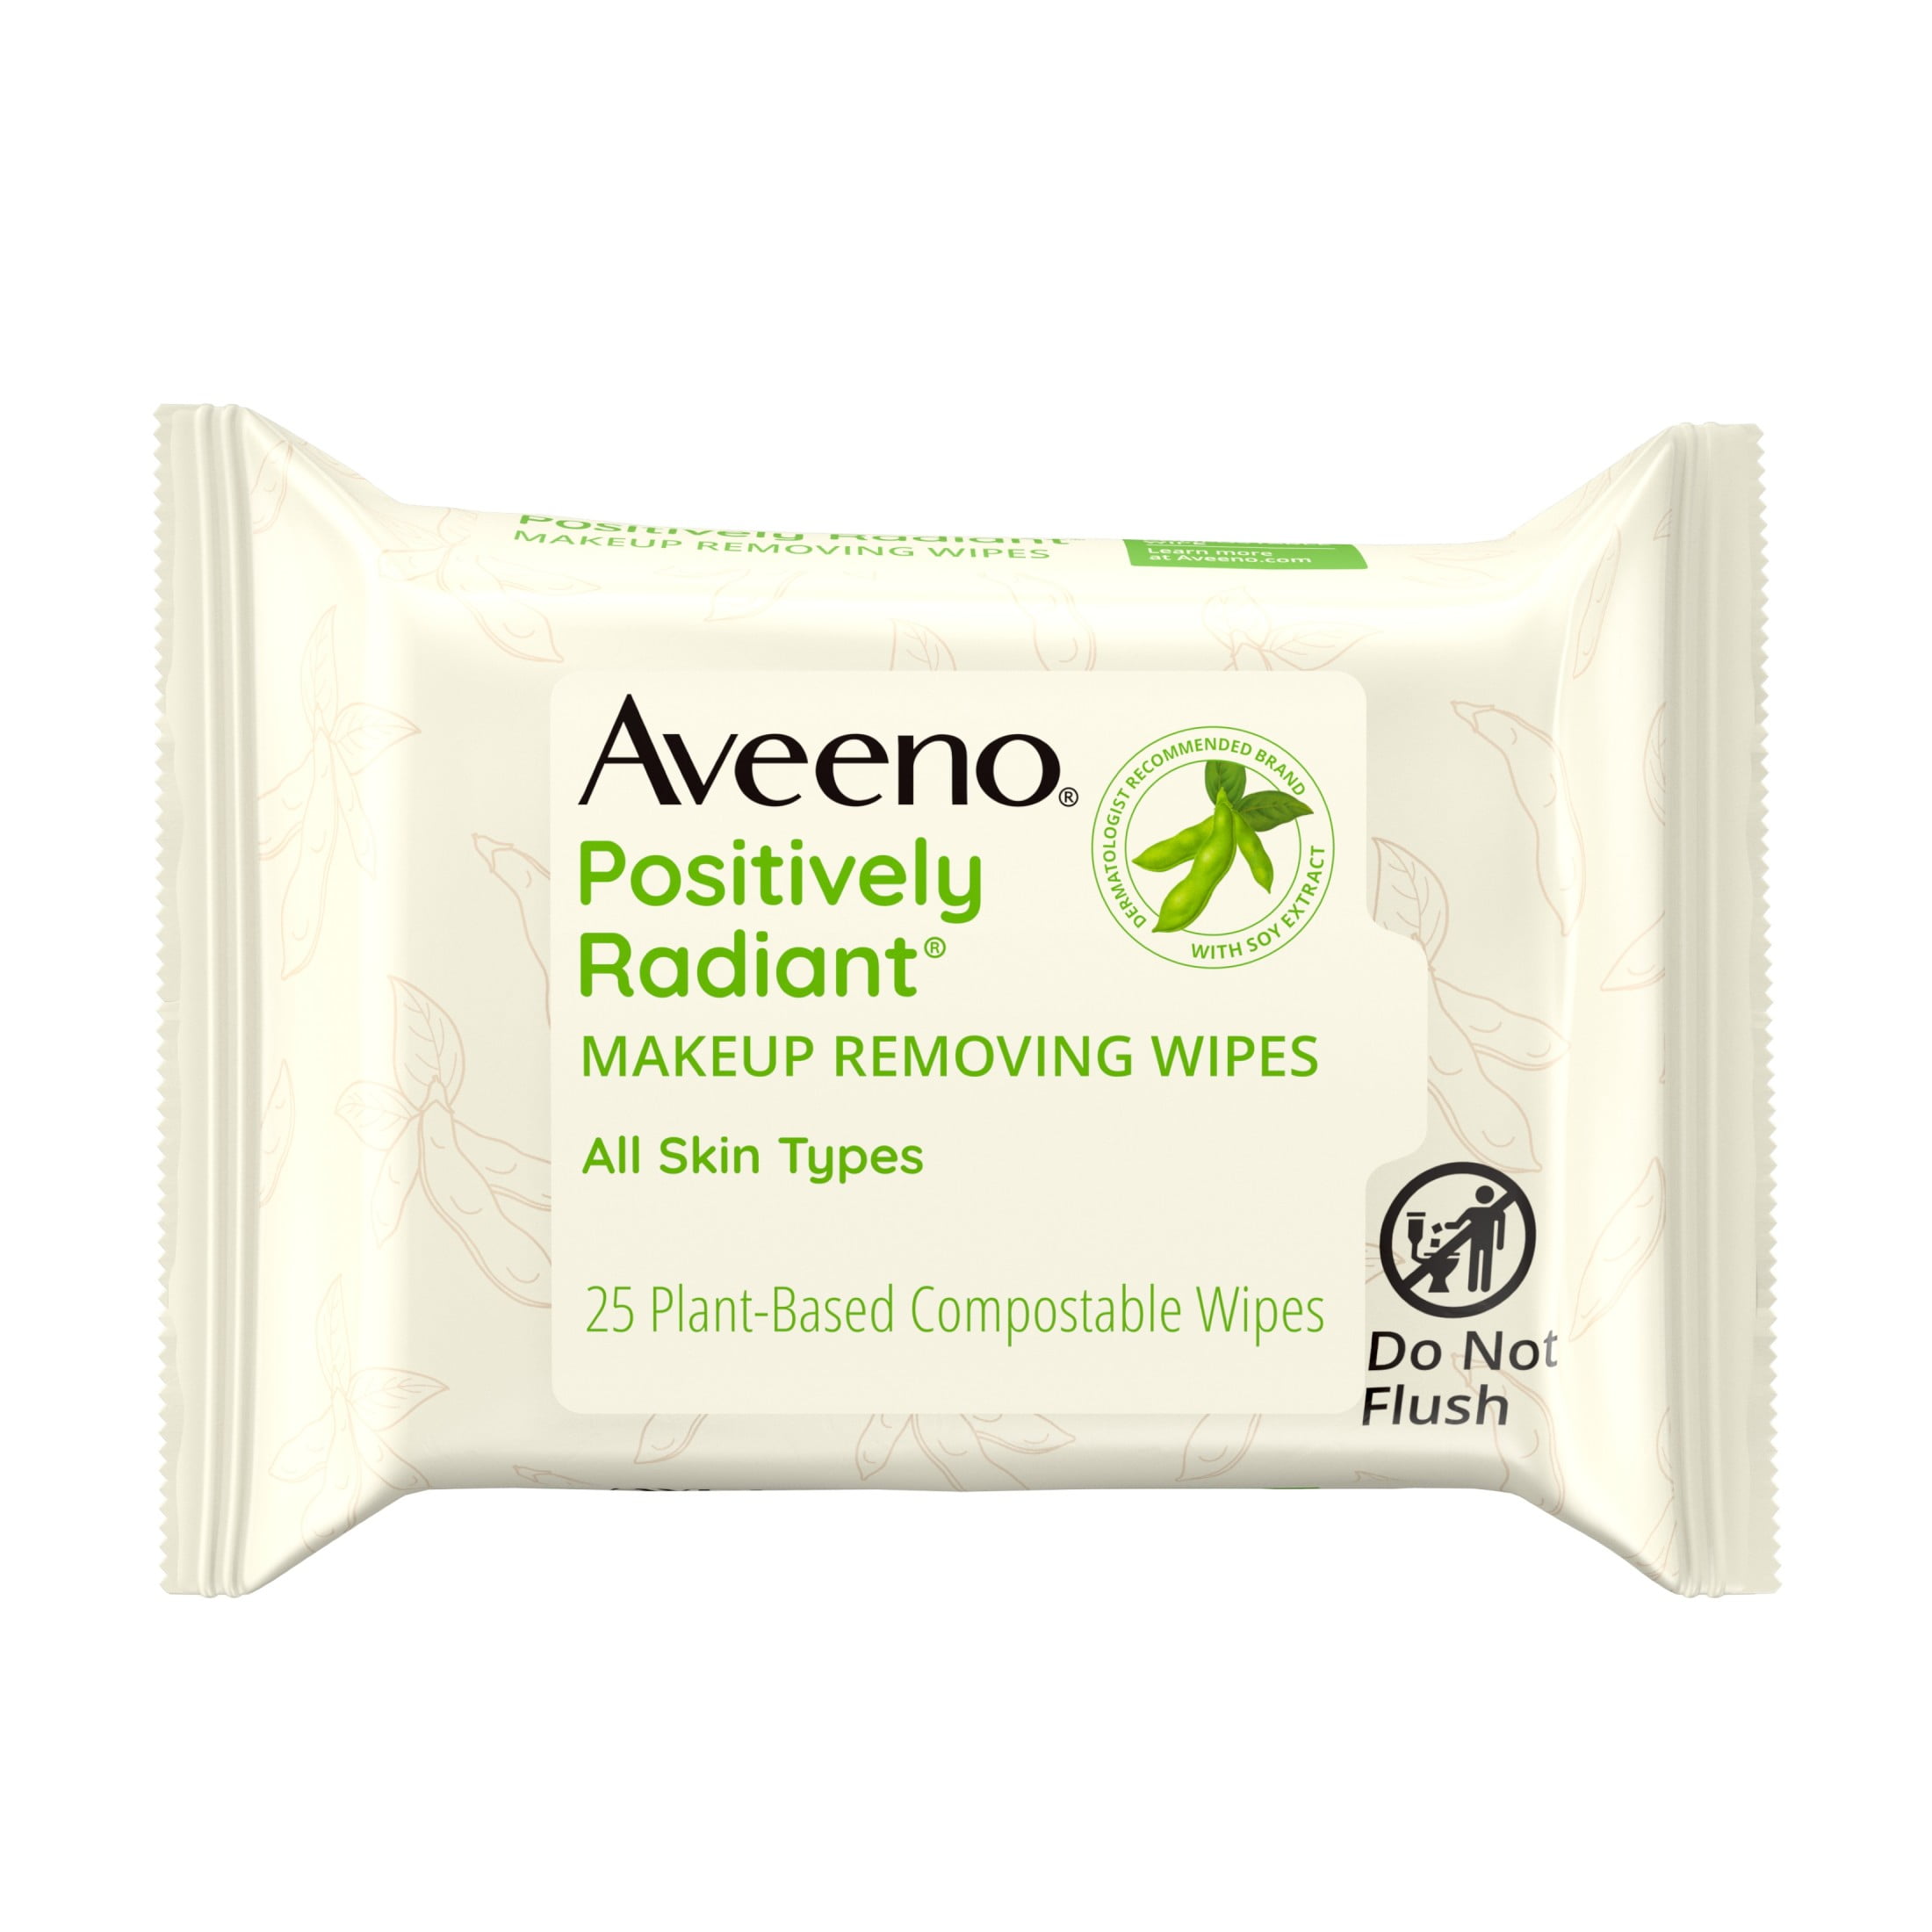 Aveeno Positively Radiant Makeup Removing Wipes Cleanse 25